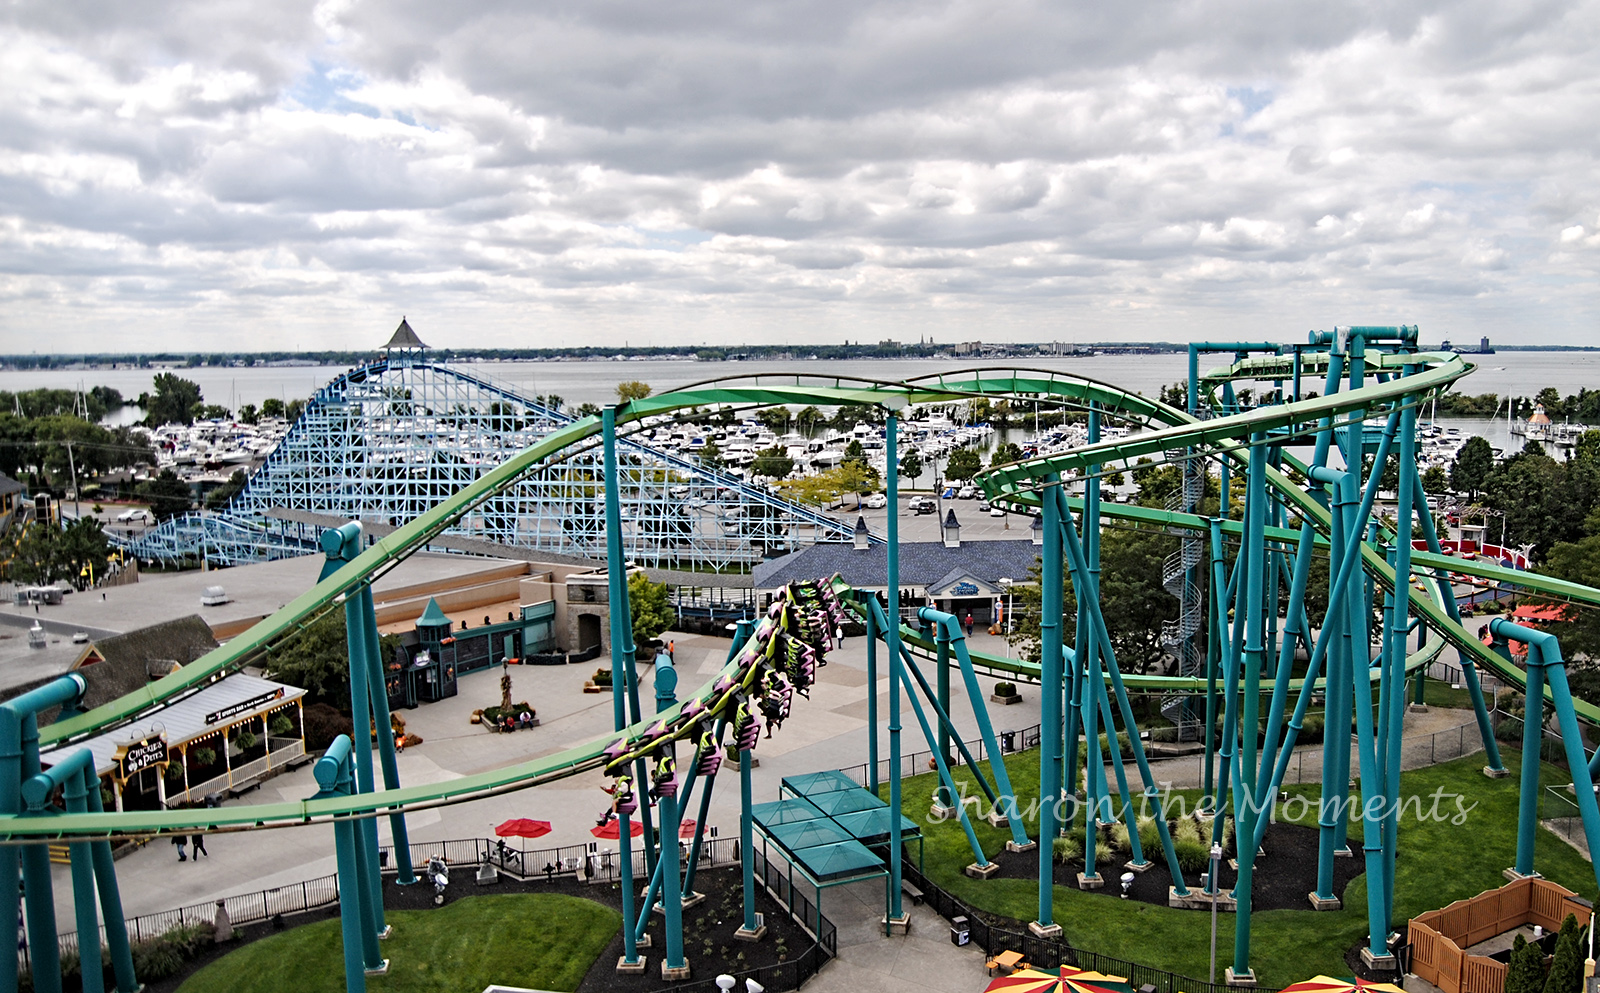 Fright or Fear or Family Fun... Last HalloWeekend at Cedar Point!|Sharon the Moments Blog 